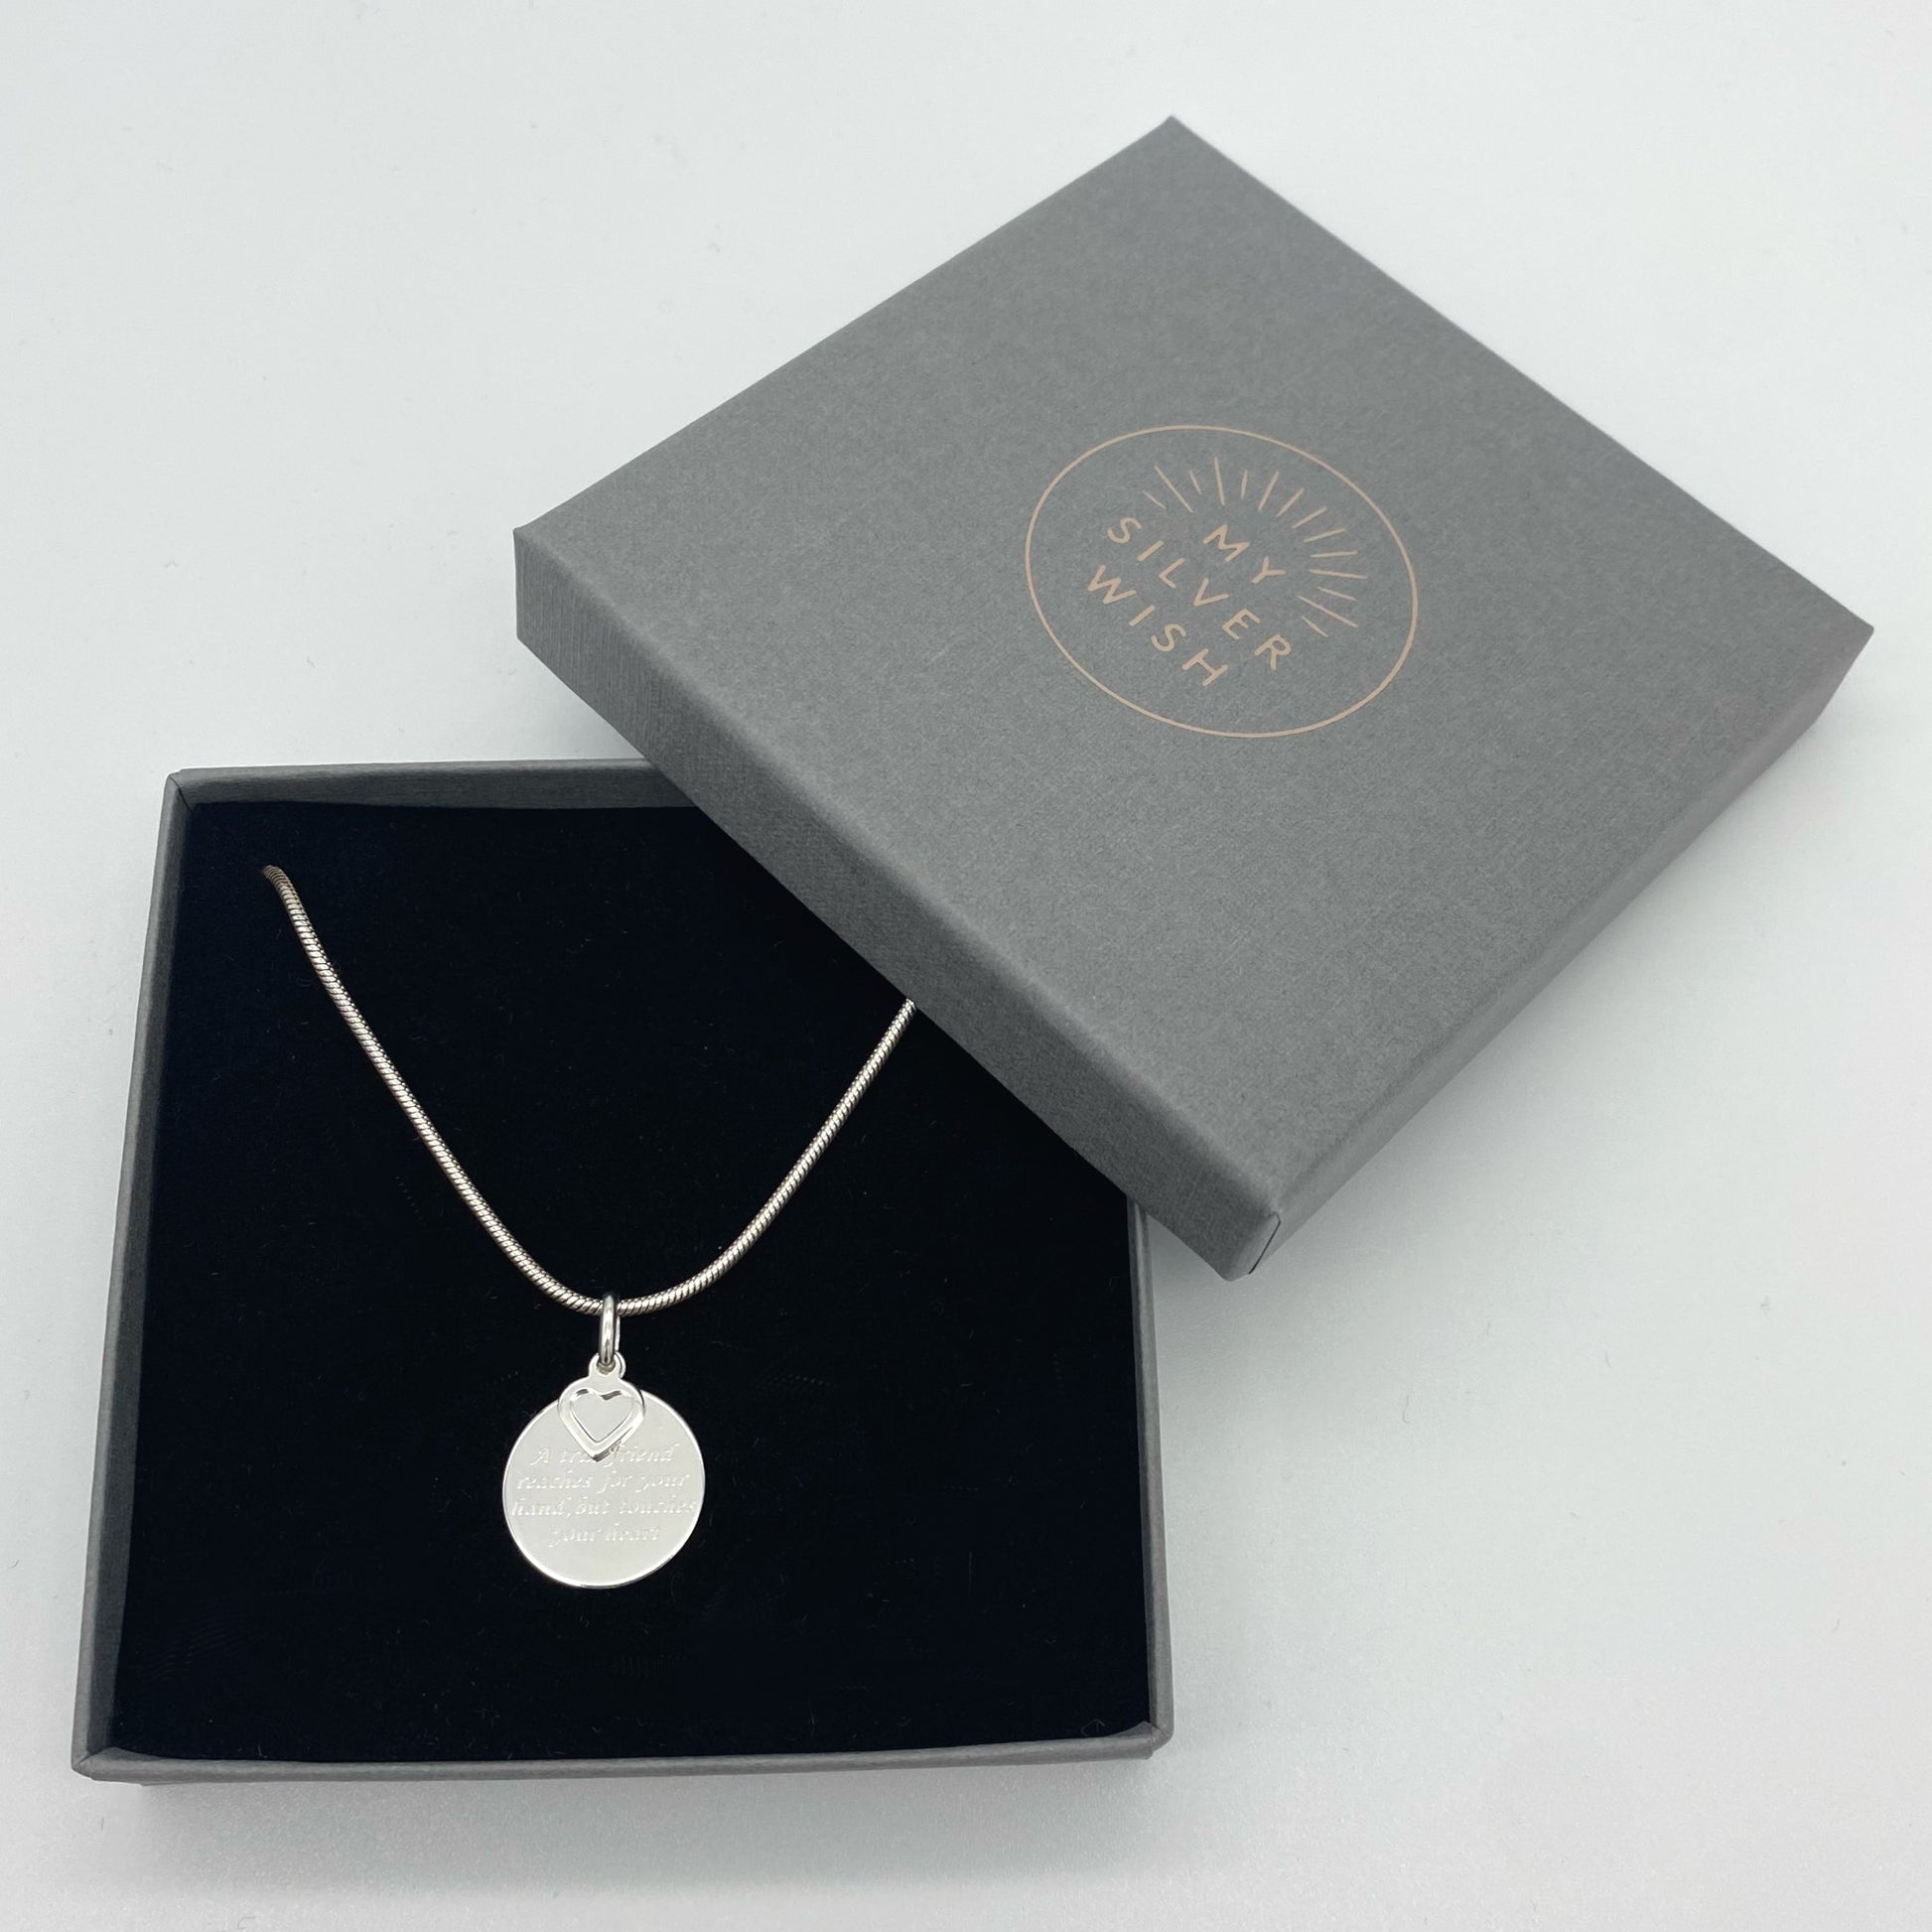 Sterling Silver Necklace with "A True Friend Reaches for your Hand but touches your Heart" Pendant by My Silver Wish